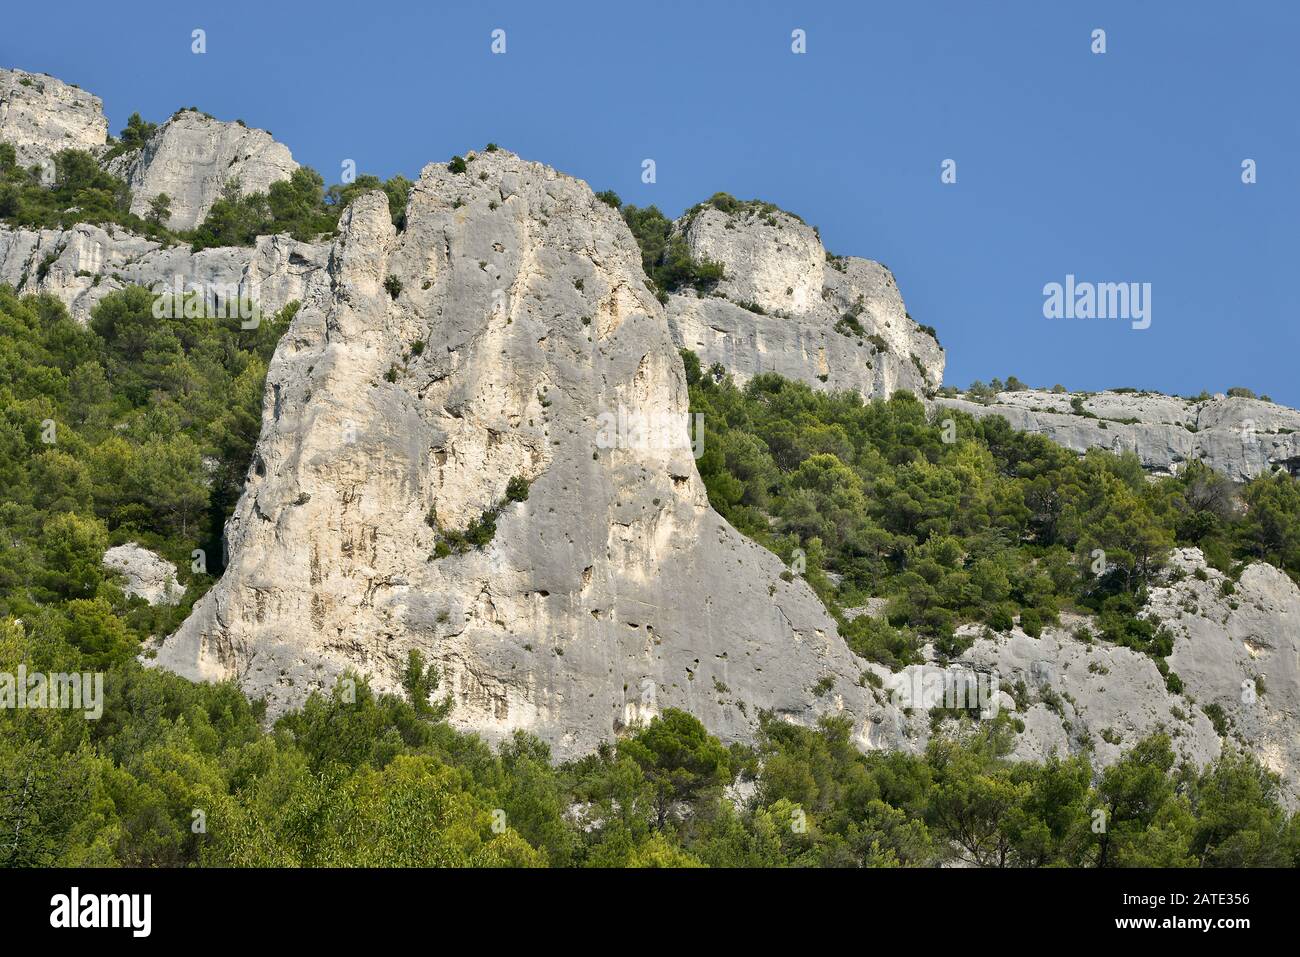 Big rock in the mountain at Fontaine de Vaucluse, a commune within the département of Vaucluse and the région of Provence-Alpes-Côte d'Azur in France Stock Photo